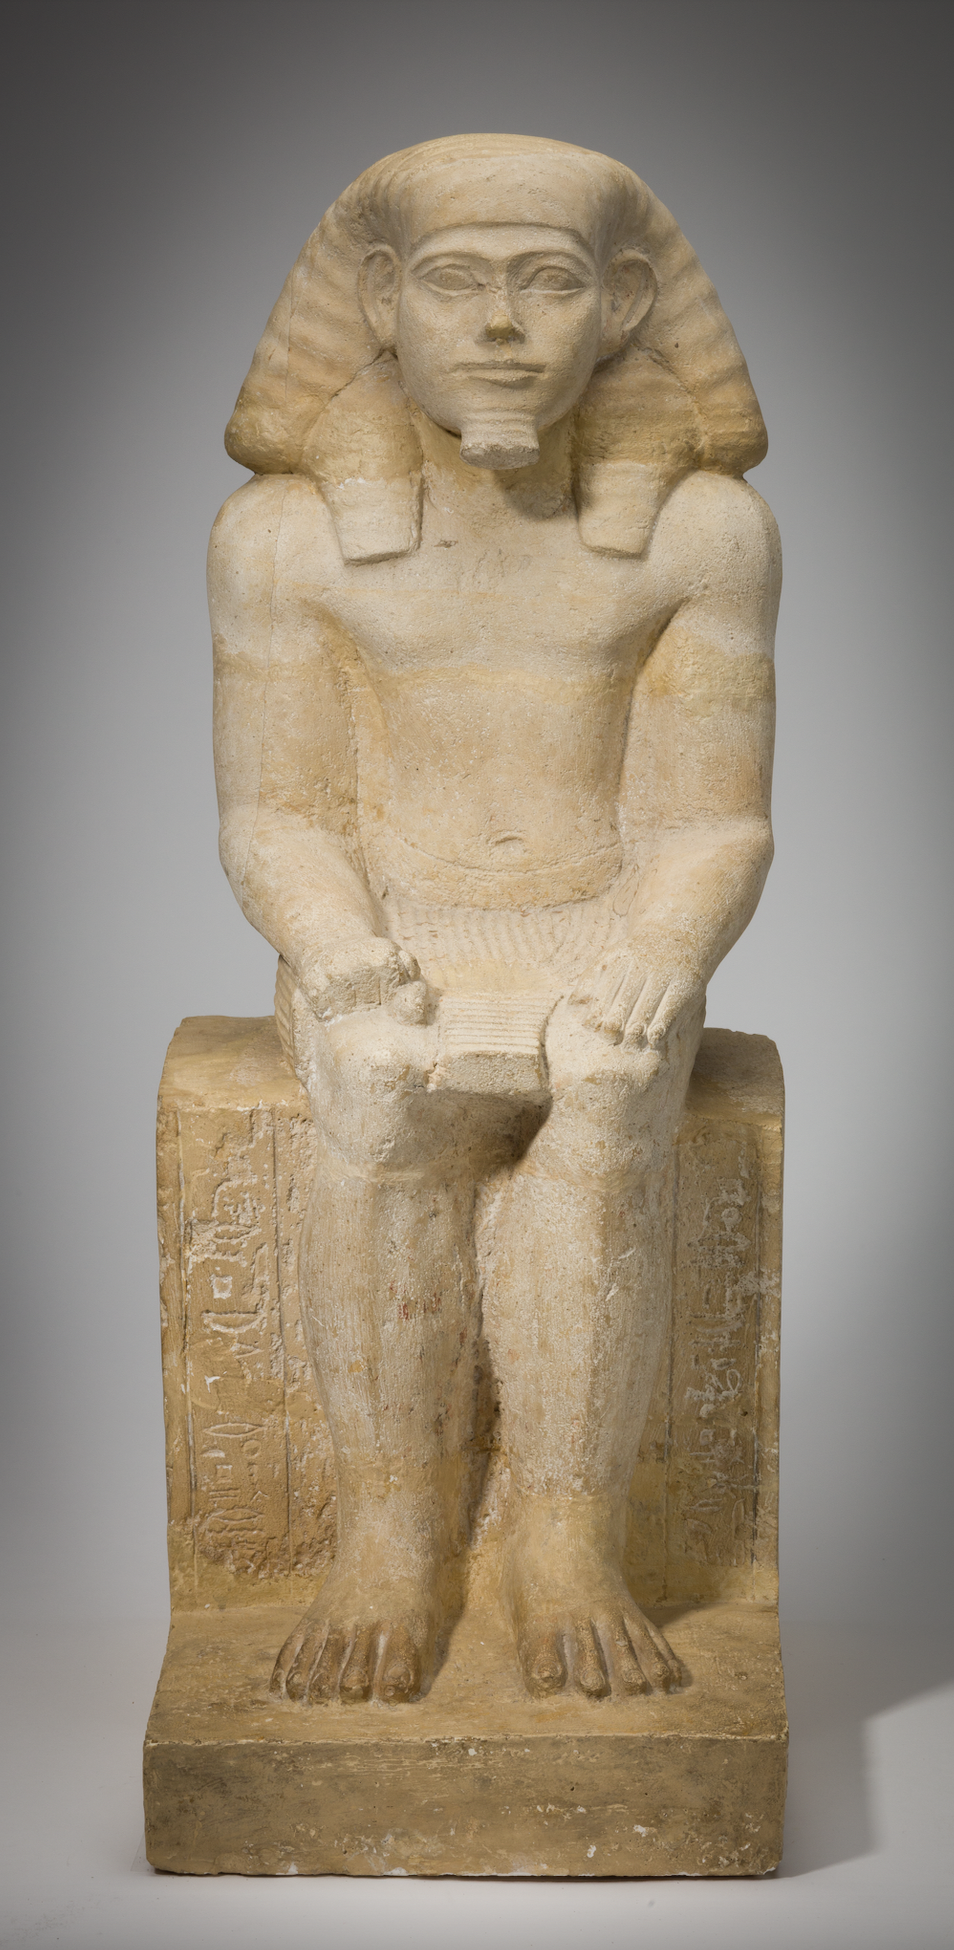 Djefhapy, ancient Egyptian, Middle Kingdom, about 1980–1760 B.C., limestone. Museum purchase, Worcester Art Museum, 1938.9 